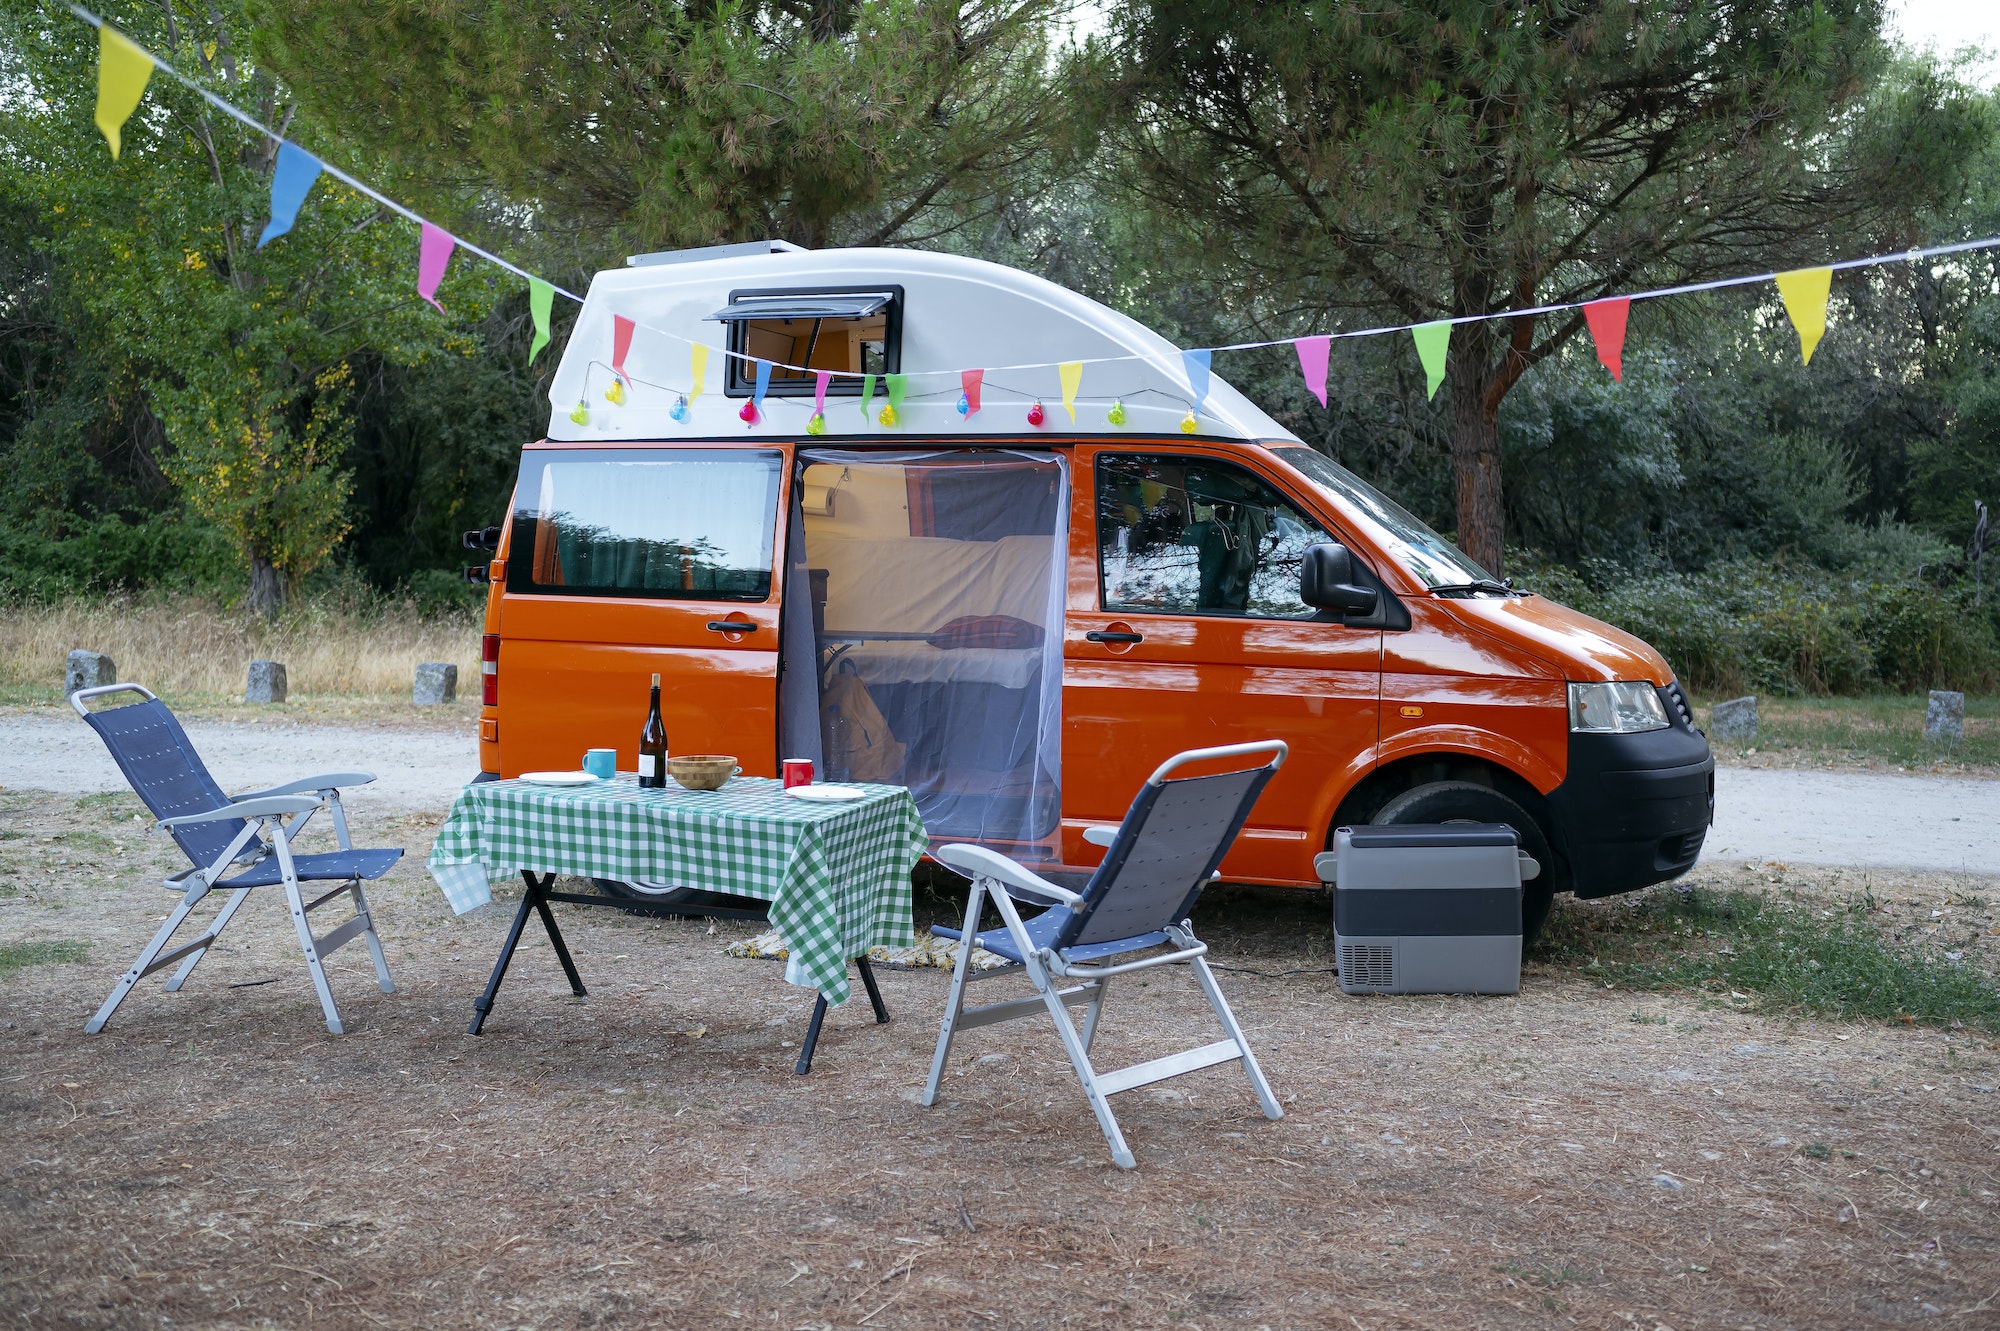 Camper van in the field with chairs and table for recreation. van life concept .